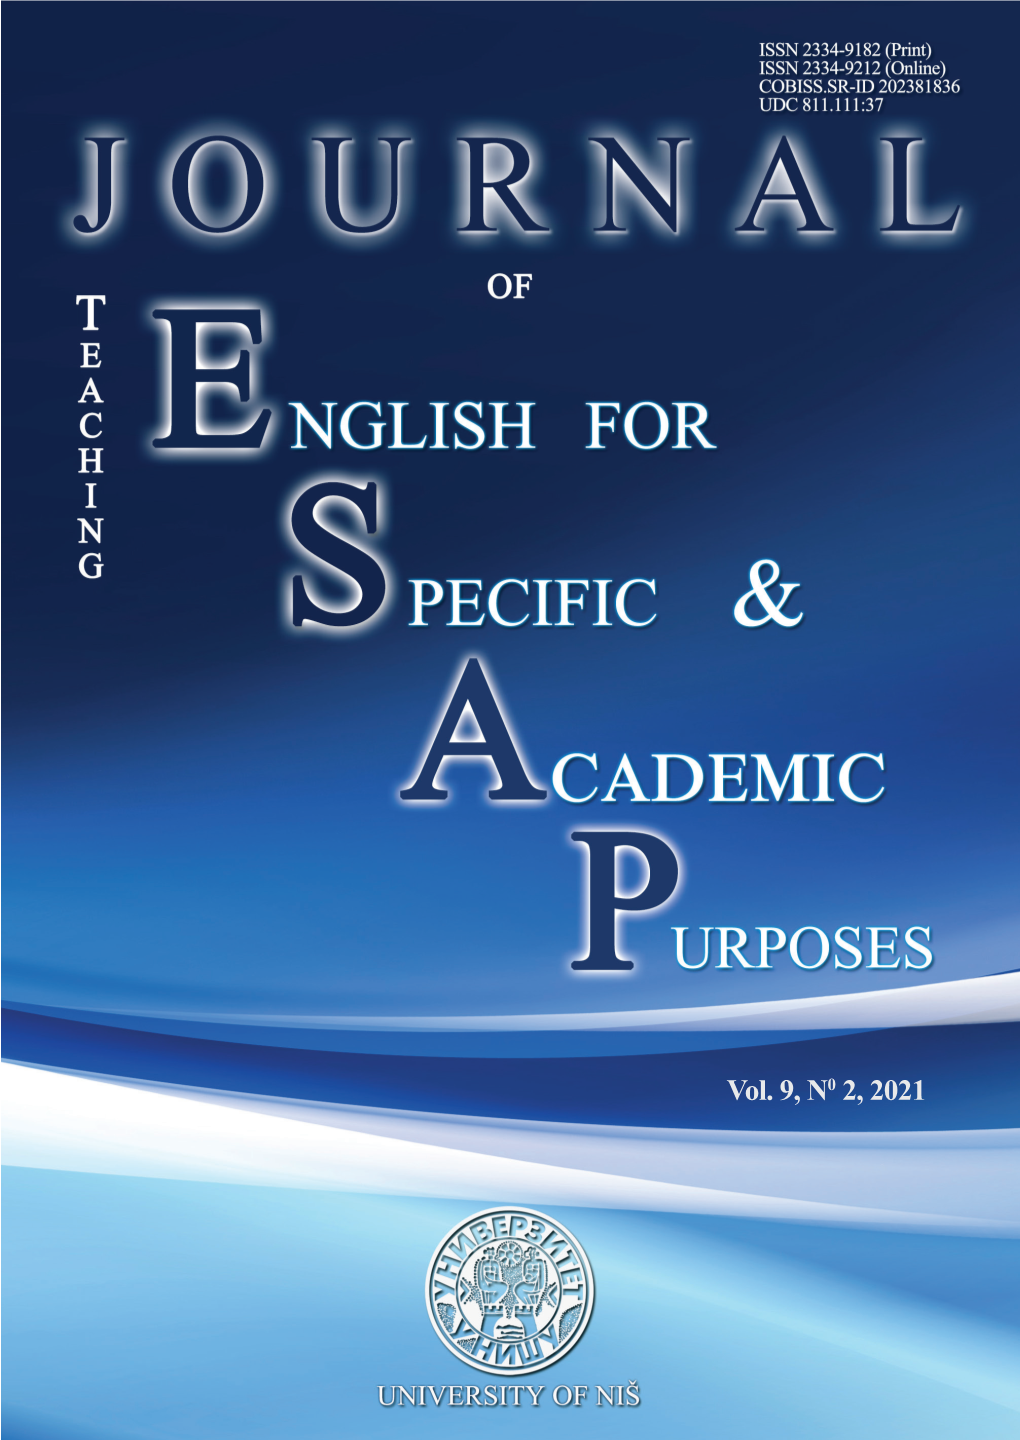 Vol. 9, N0 2, 2021 Journal of Teaching English for Specific and Academic Purposes Vol